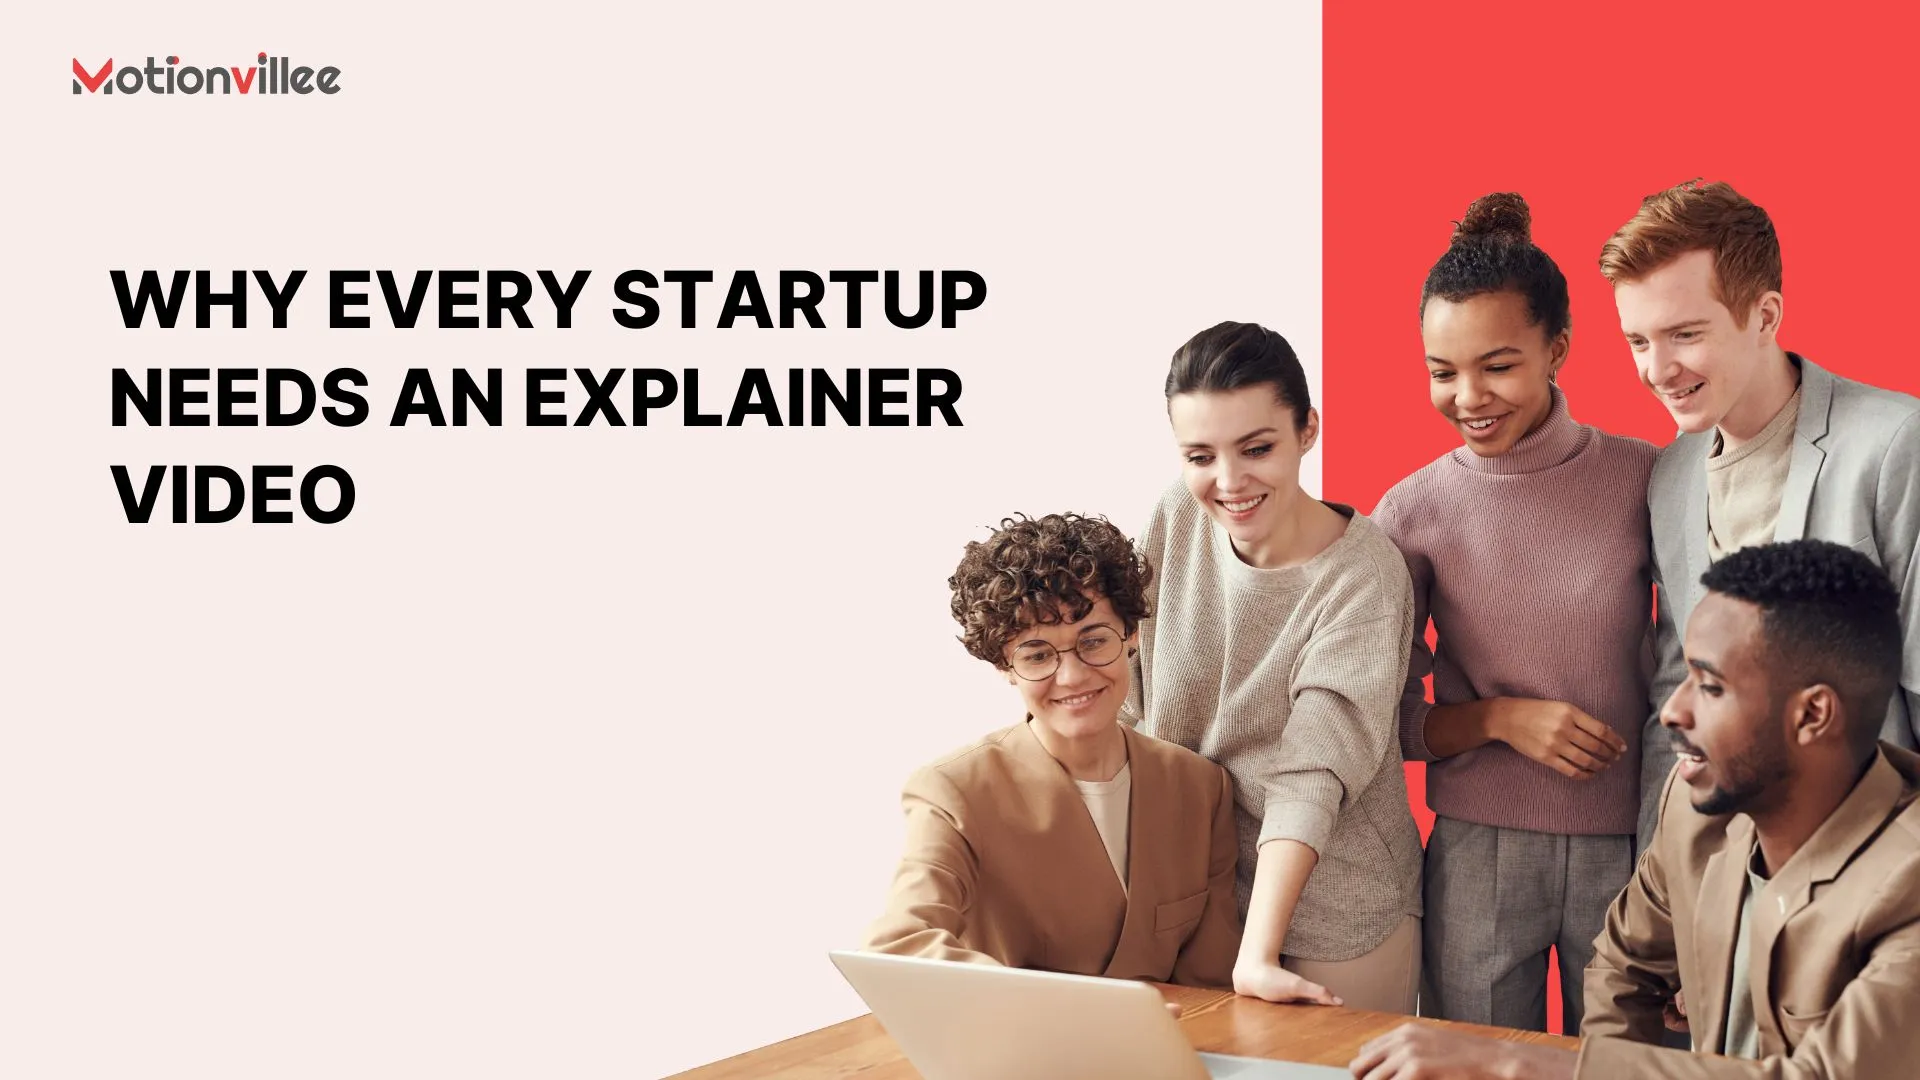 Why Every Startup Needs Explainer Videos